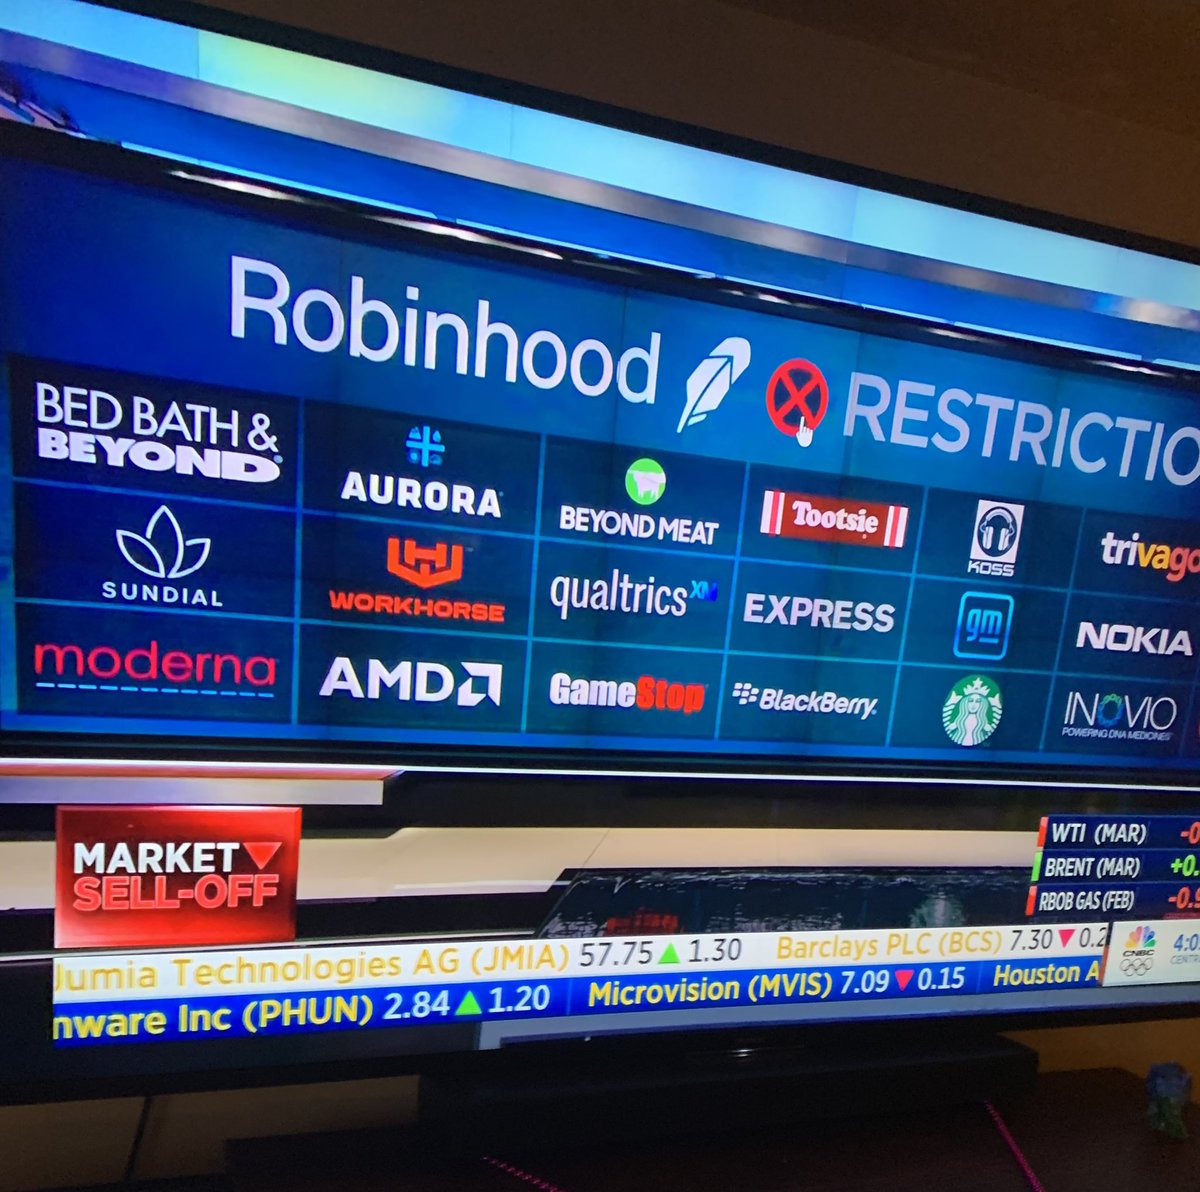  #boycottrobinhood These are the stocks they restricted and prevented you from fighting back against the hedges including CDEL. $BBBY  $SNDL  $MRNA  $WKHS  $AMD  $BYND  $XM  $GME  $TR  $EXPR  $BB  $TRVG  $NOK  $INOCitadel also targeted the entire OTC market and robbed us  @stoolpresidente